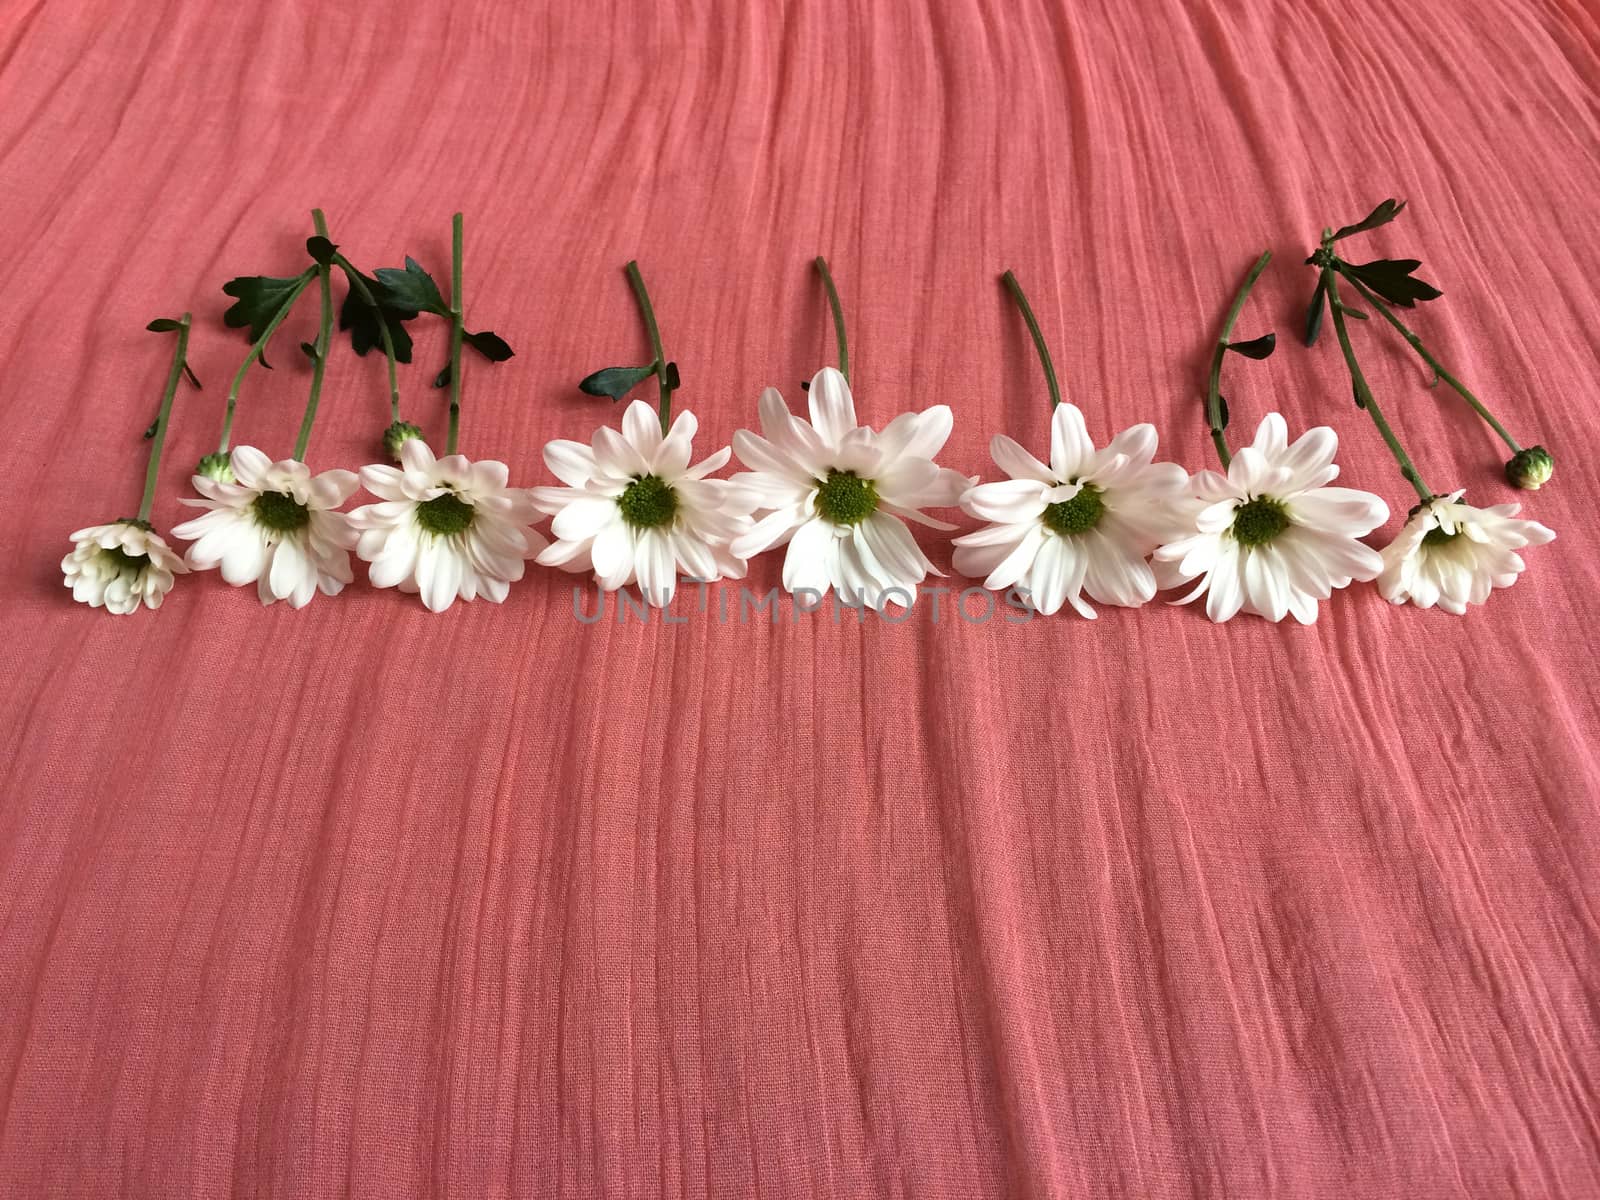 White daisies on a salmon colored blanket by mmm